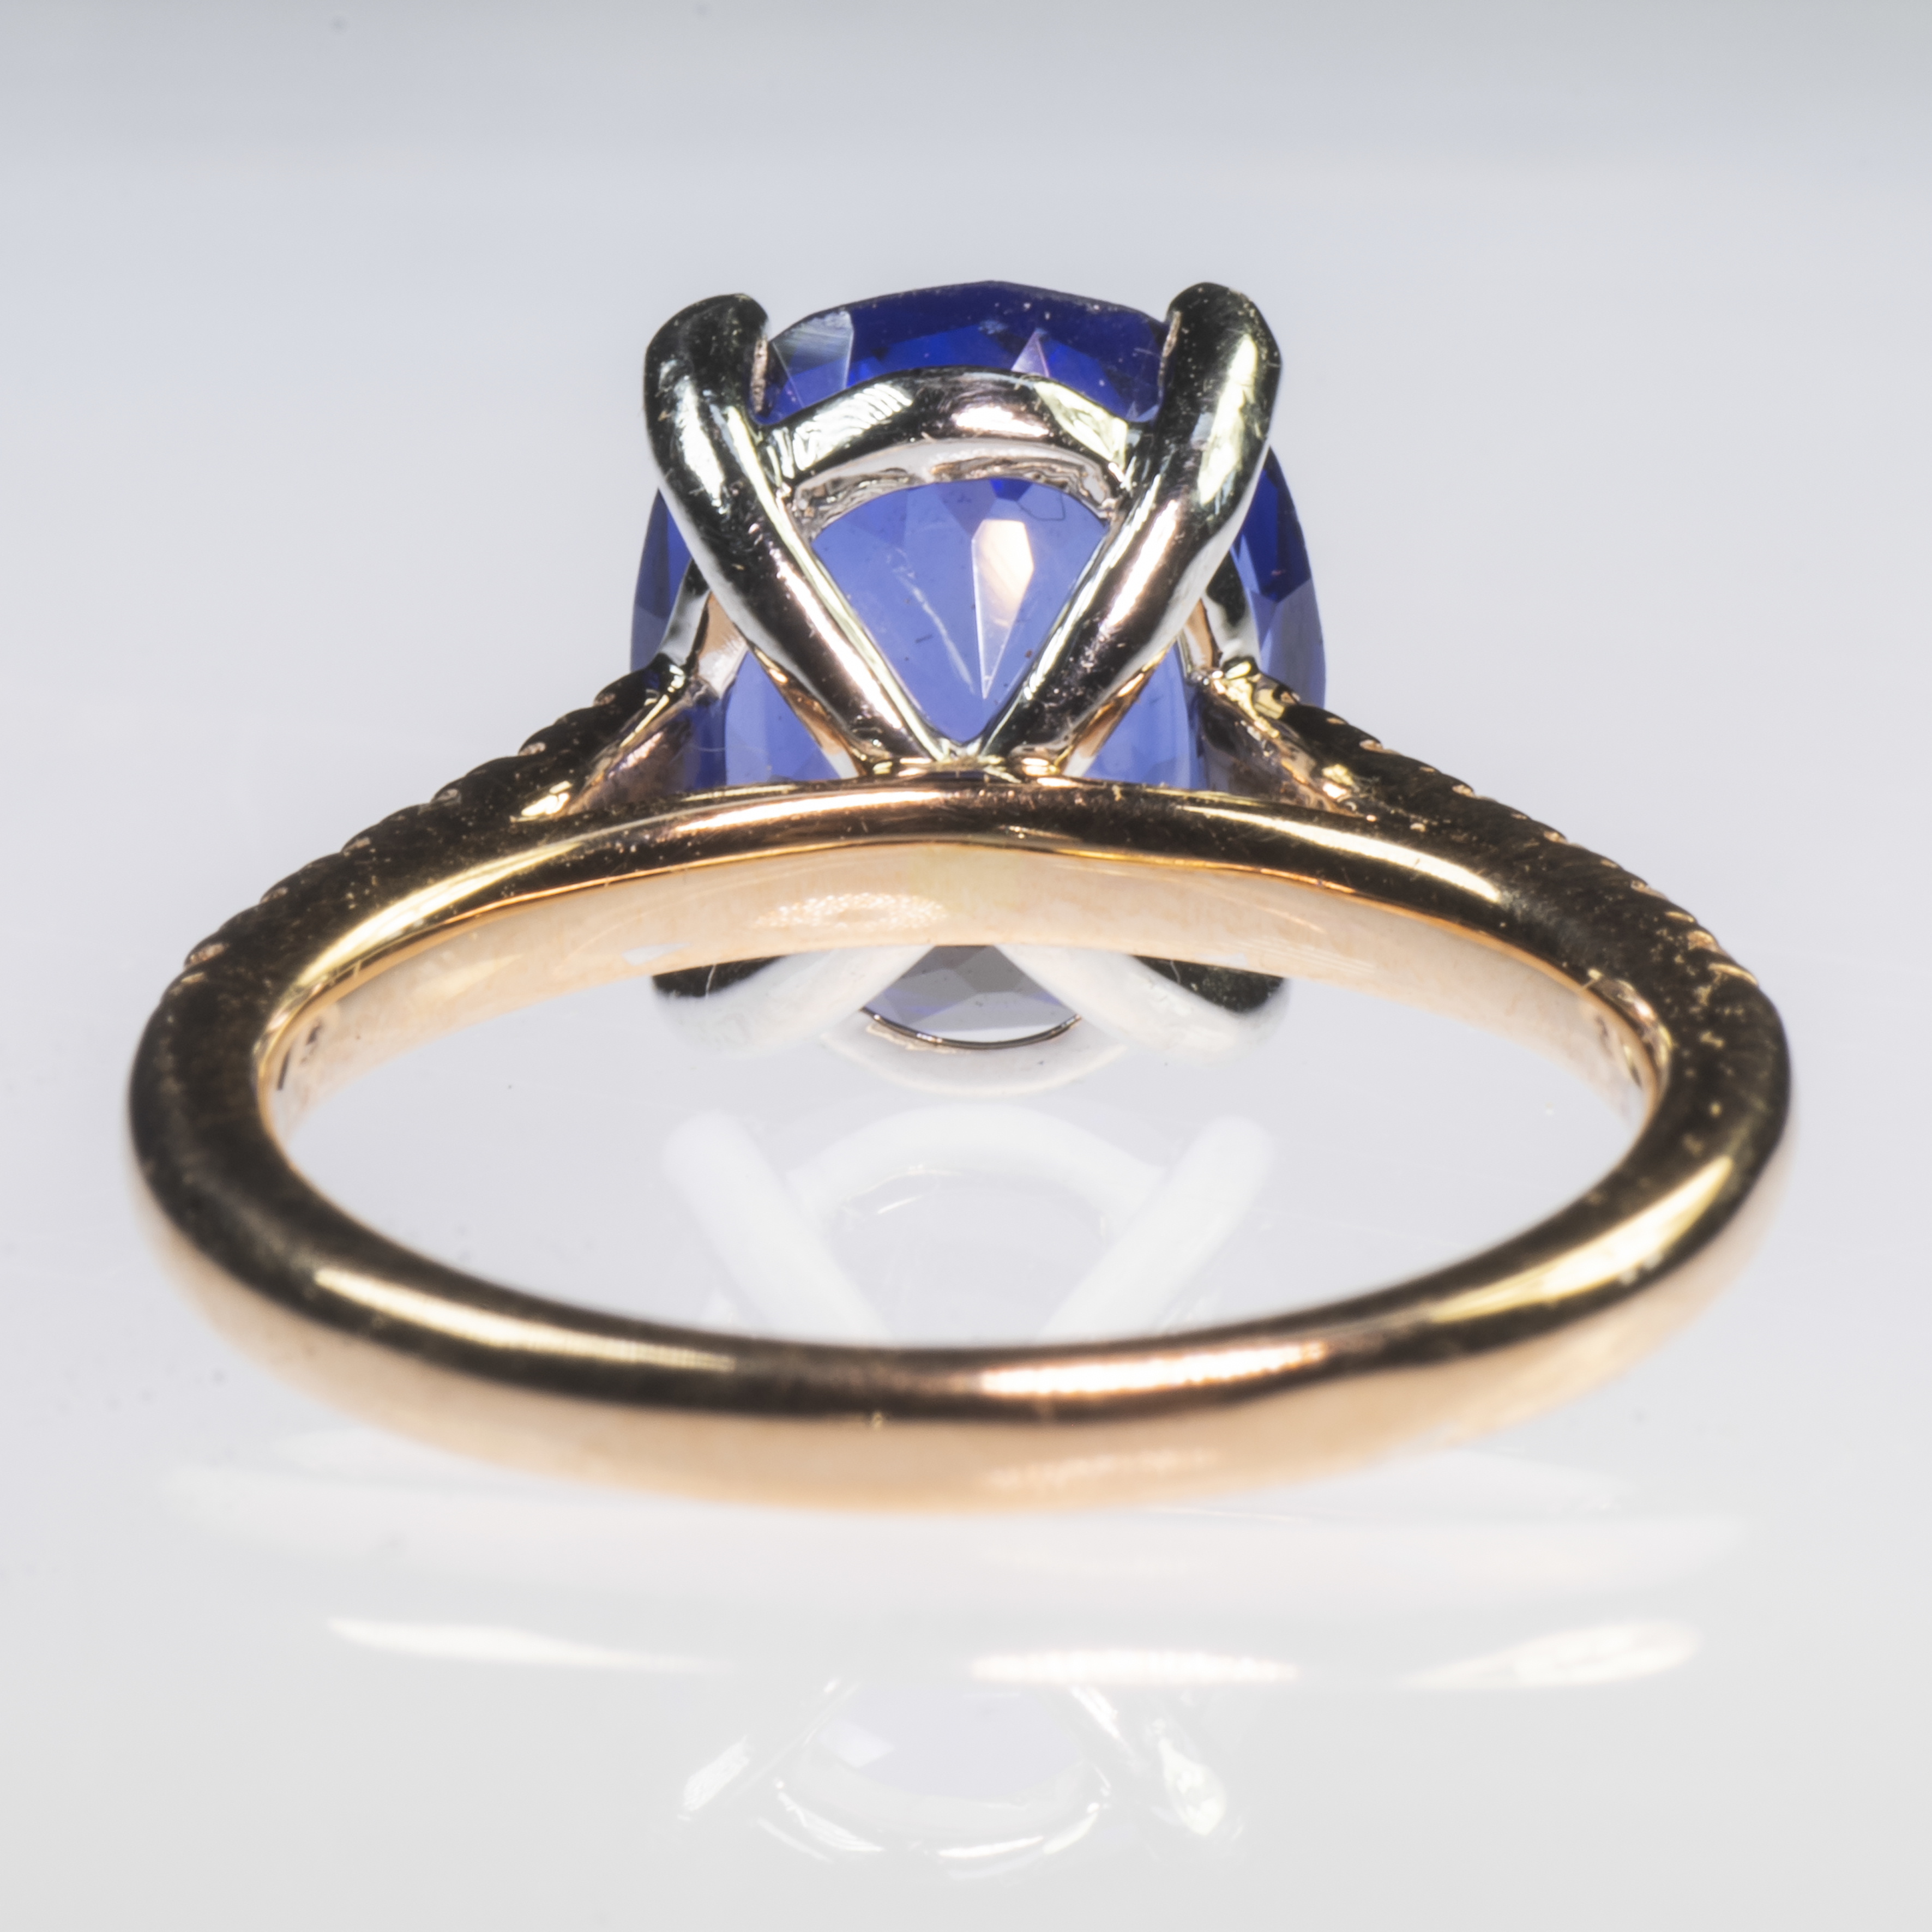 AN 18CT ROSE GOLD AND PLATINUM SYNTHETIC SAPPHIRE AND DIAMOND RING - Image 3 of 3